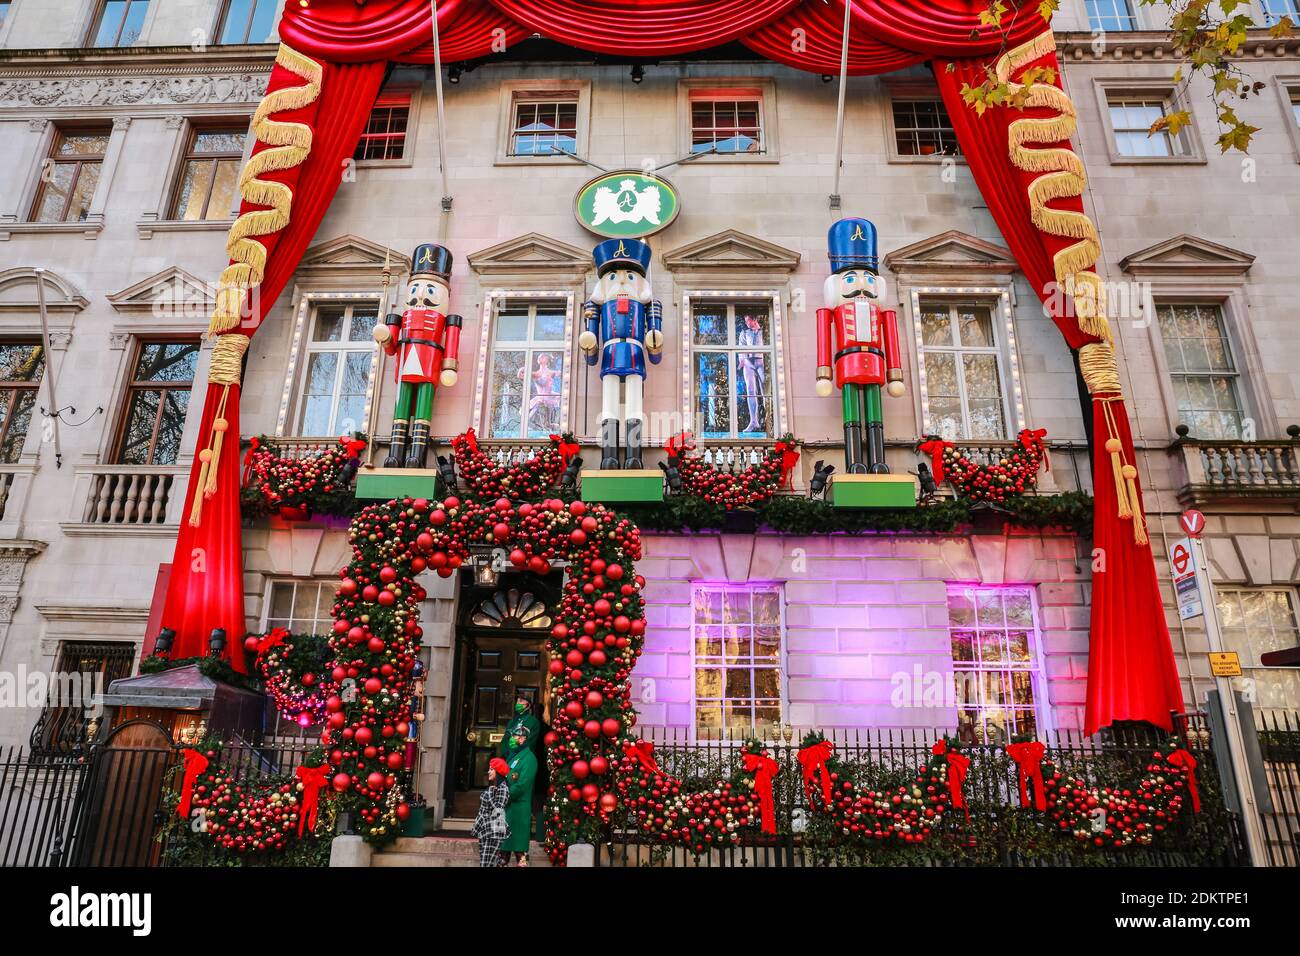 London, UK. 15 December 2020. Annabel's - Christmas decorations in front of the Private Members Club in Mayfair. Credit: Waldemar Sikora Stock Photo